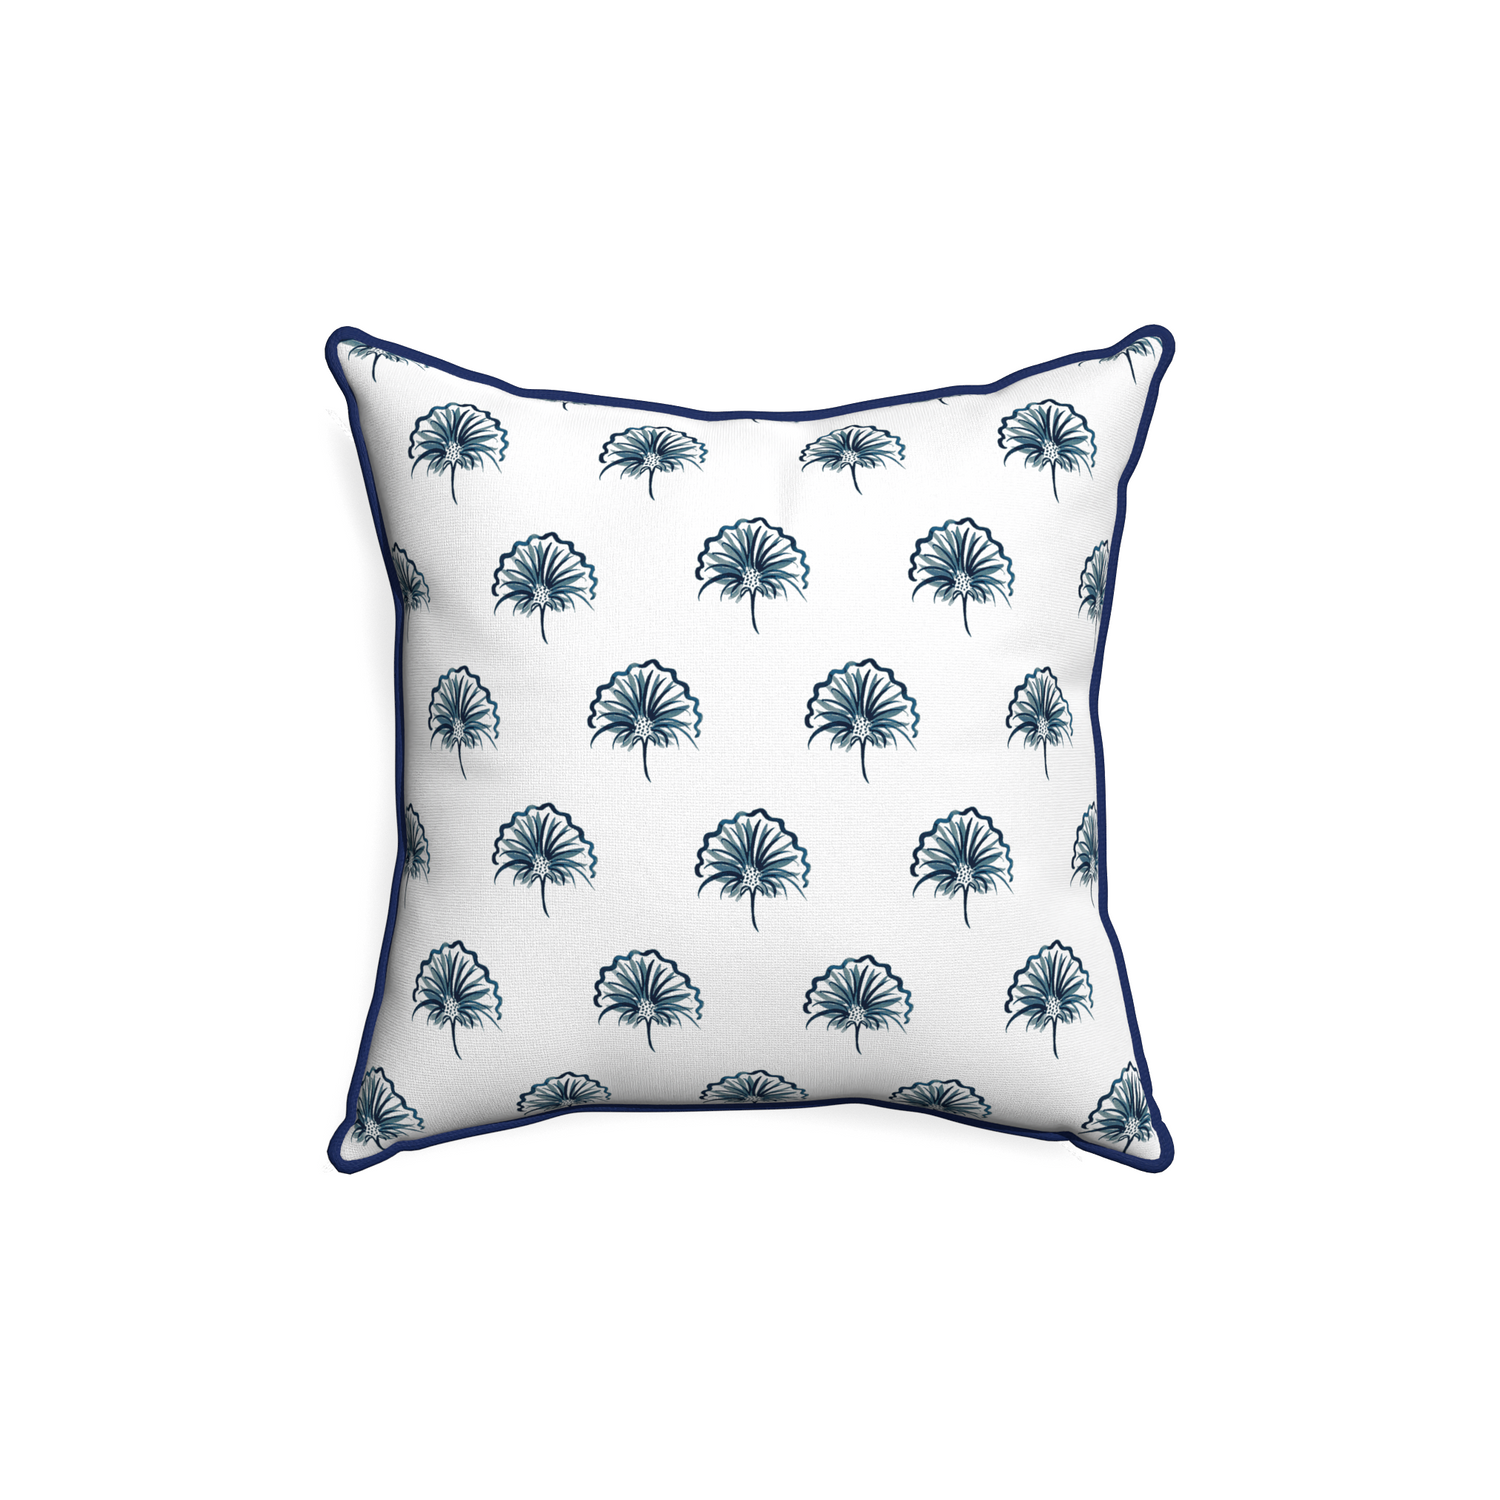 18-square penelope midnight custom floral navypillow with midnight piping on white background